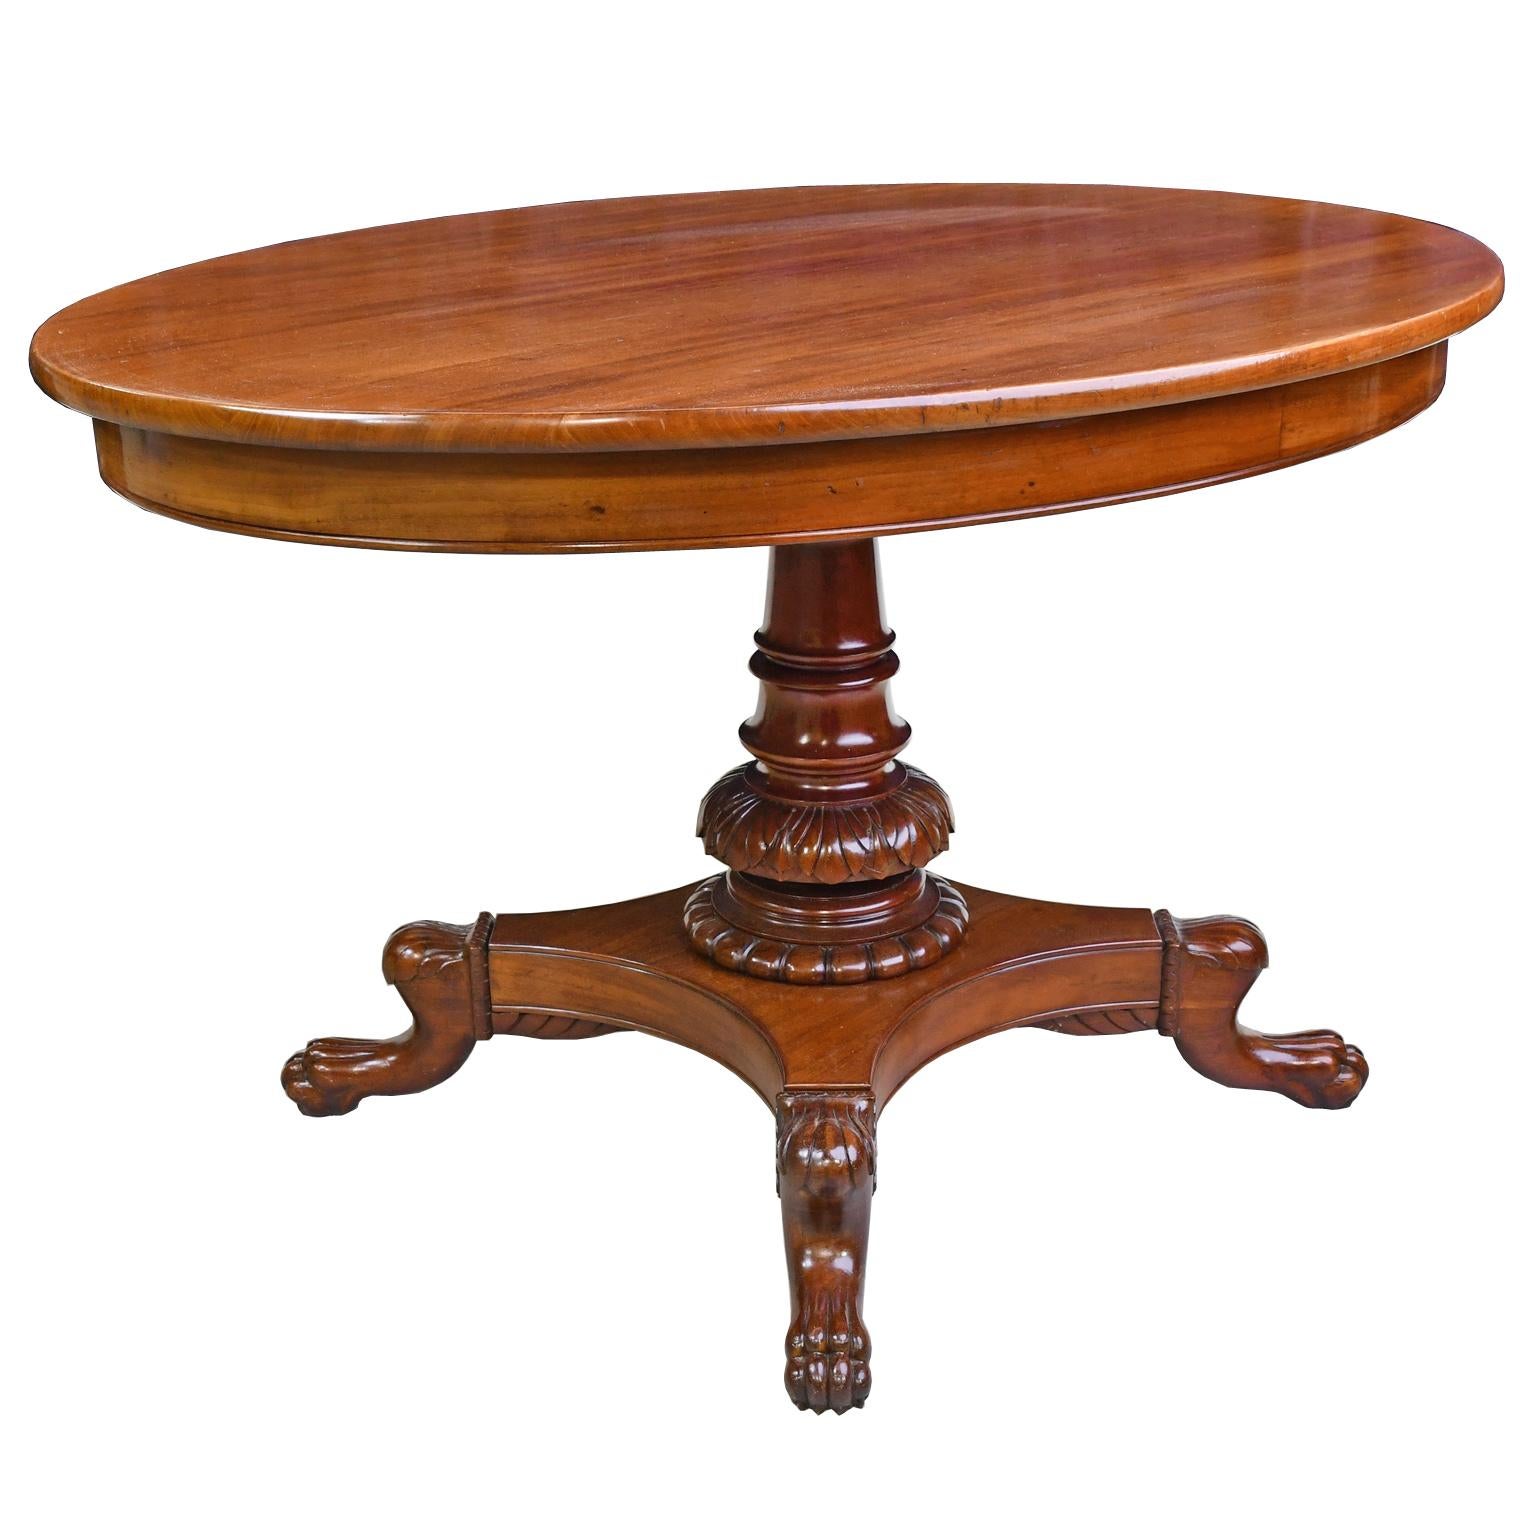 A handsome Christian VIII neoclassical-style tea or breakfast table in mahogany with oval top on foliate-carved baluster-turned column resting on quatre-form pedestal base with carved lion's paw feet. Denmark, circa 1835. Restored in our atelier